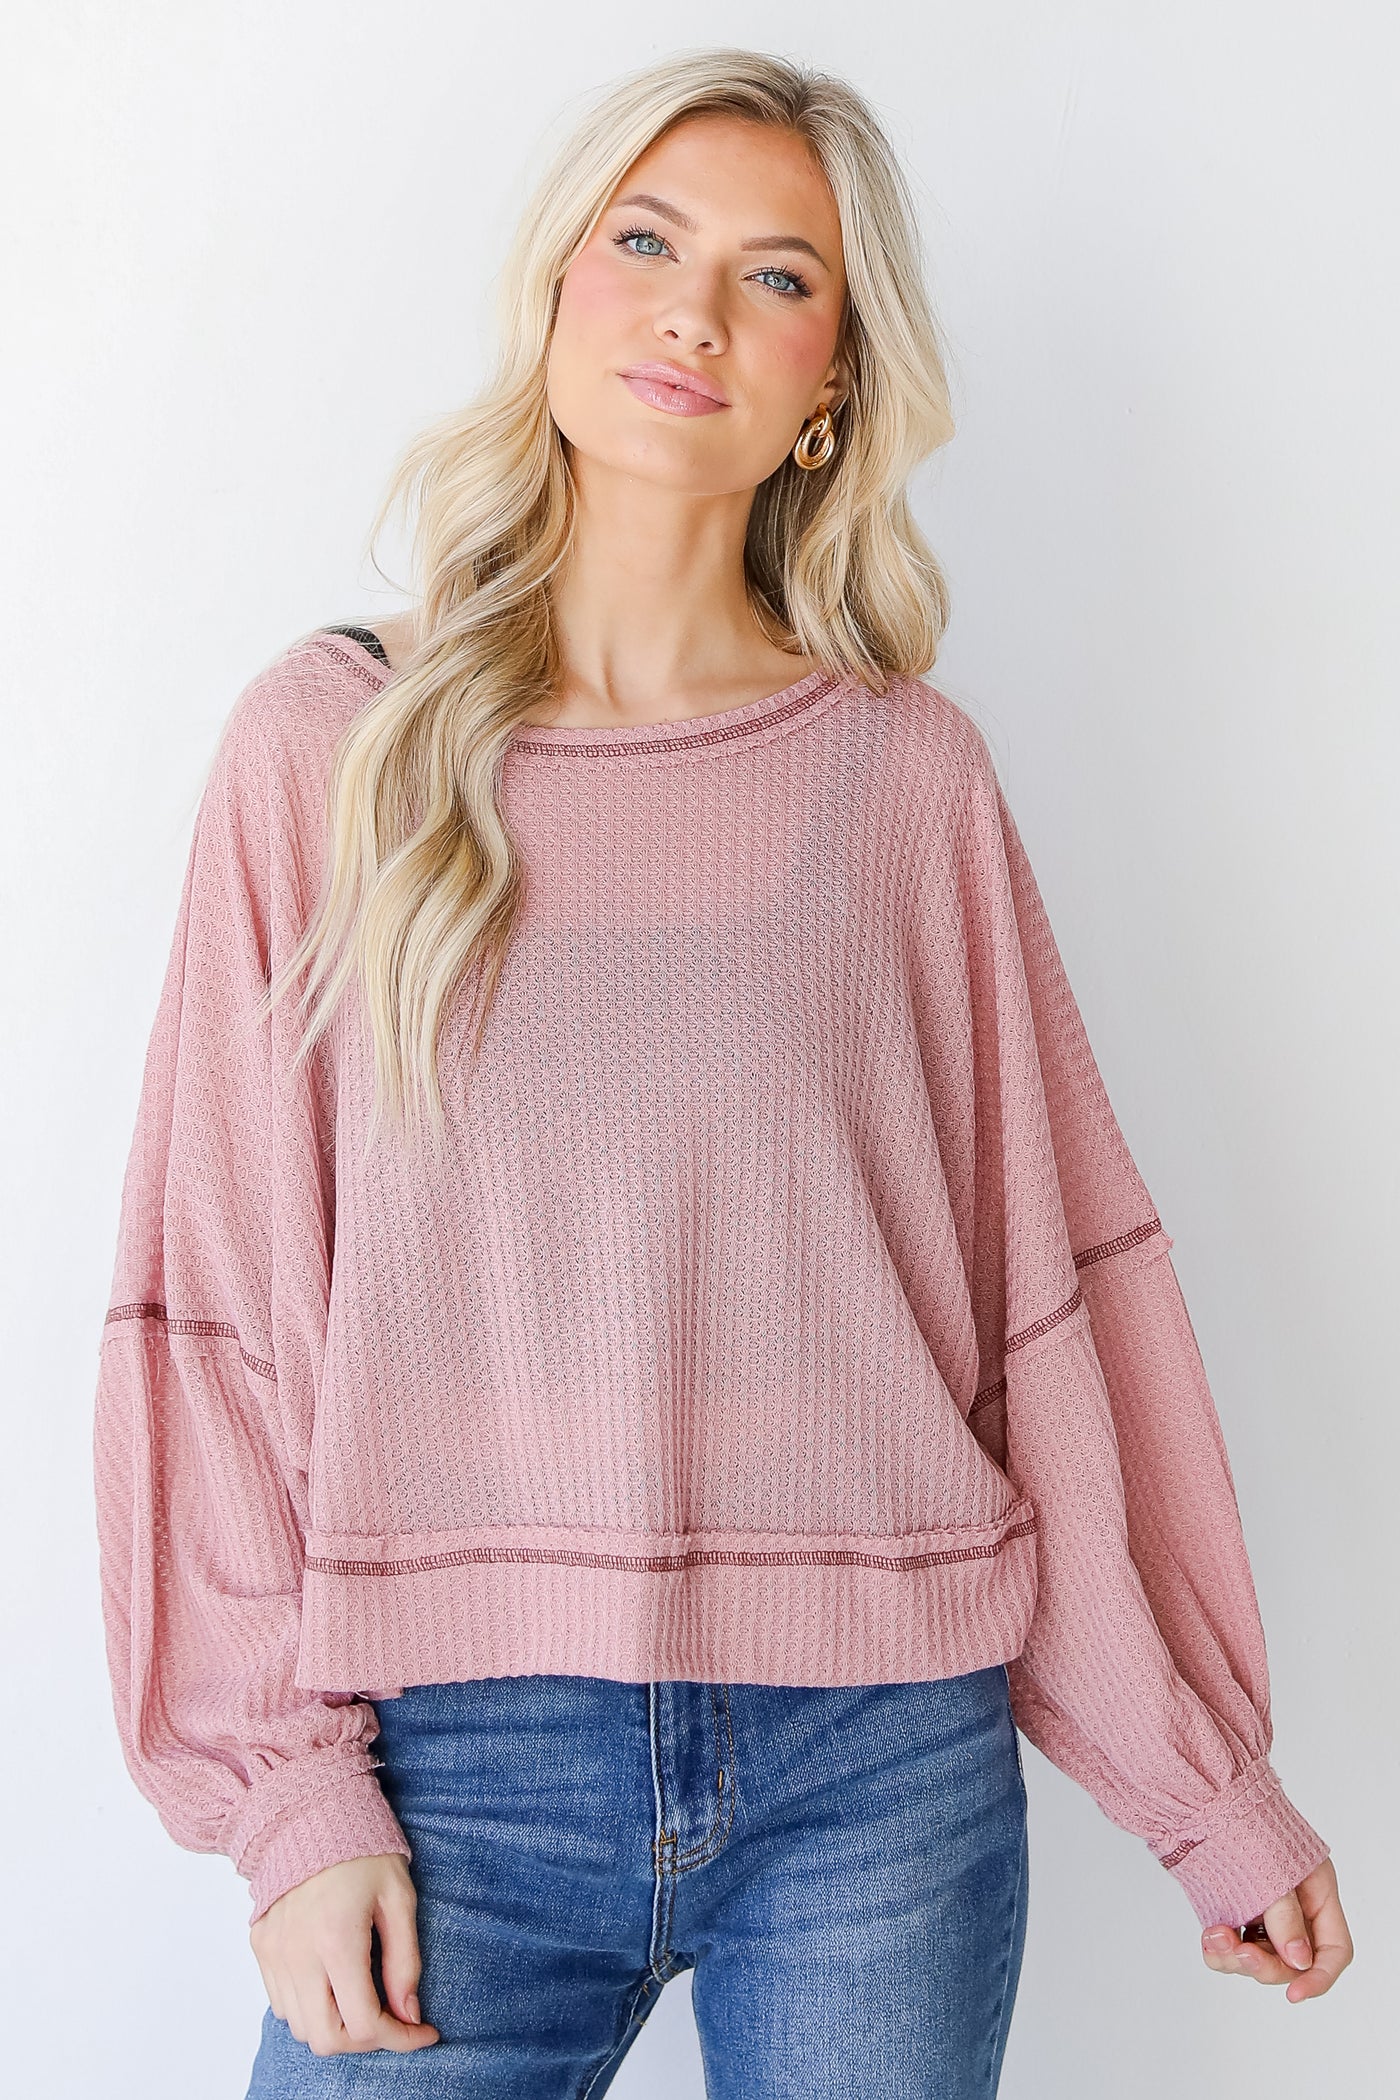 Waffle Knit Top in blush front view